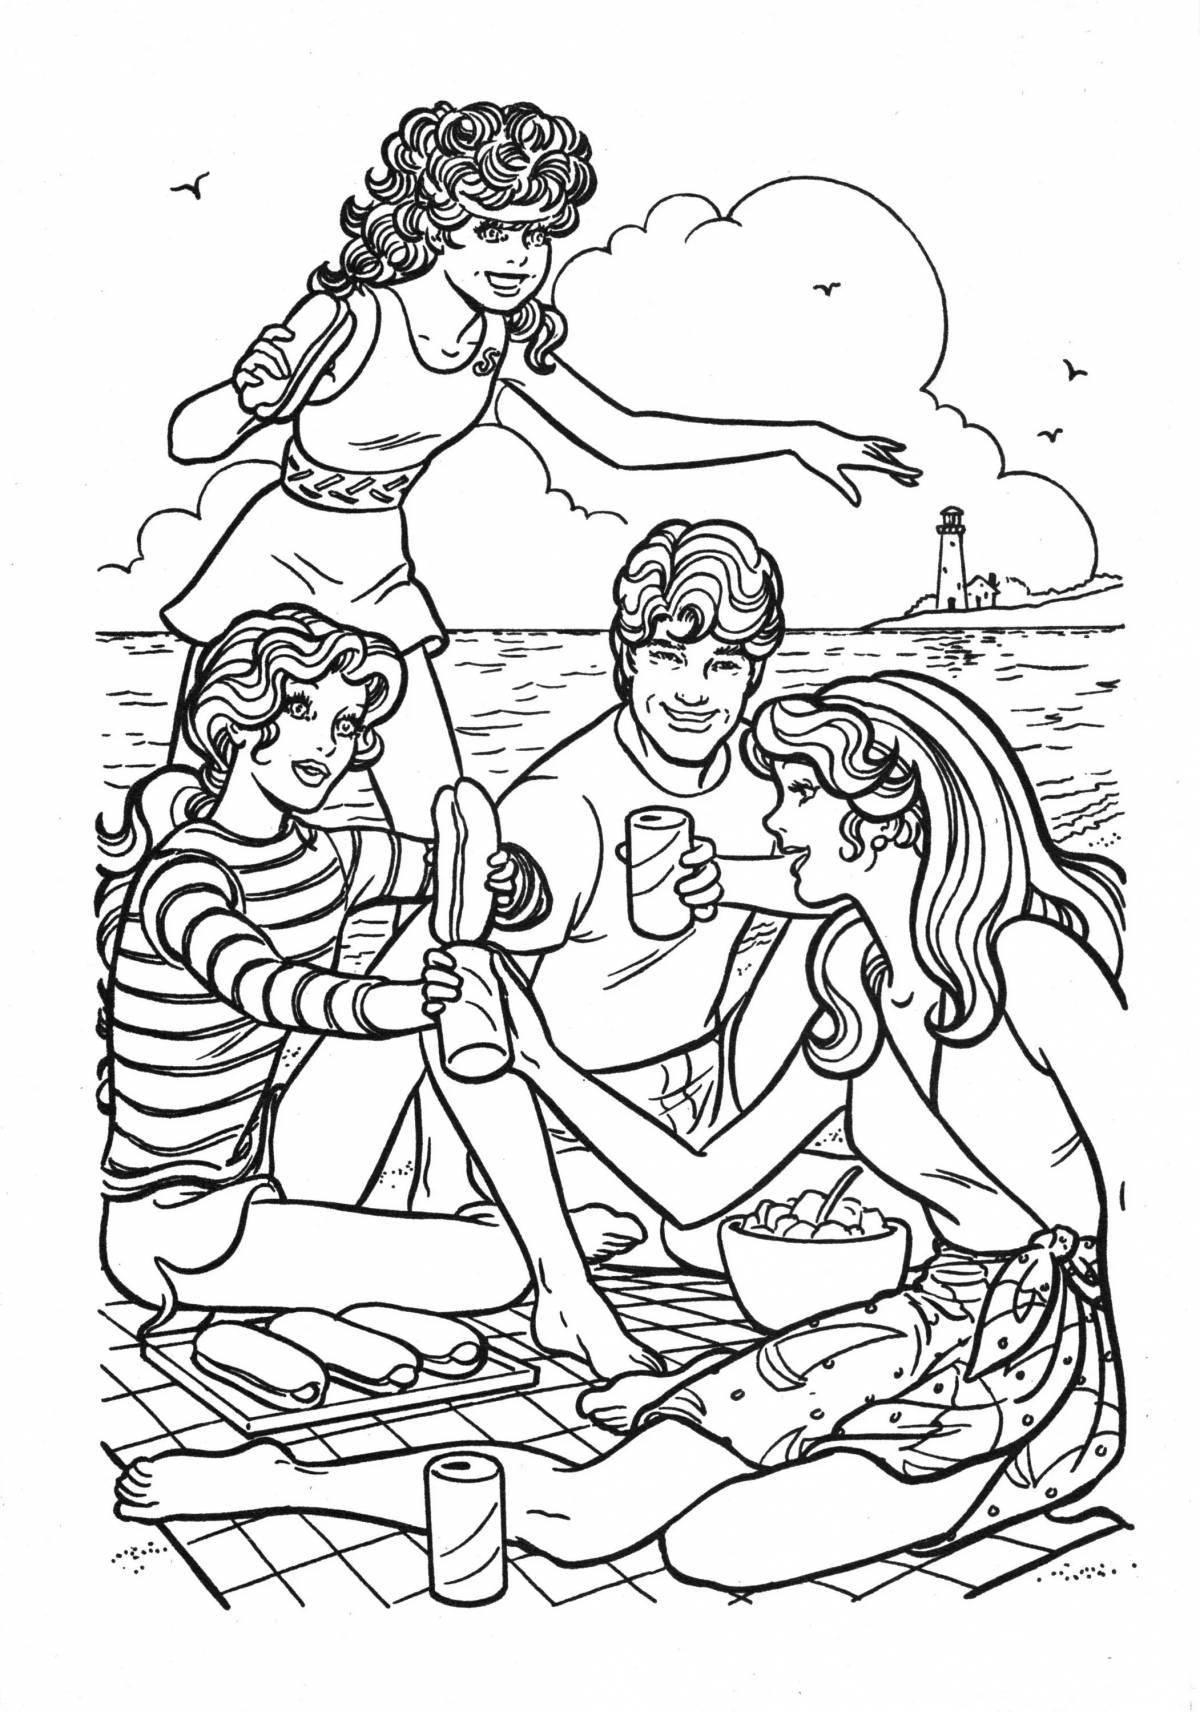 Coloring page cheering family on vacation